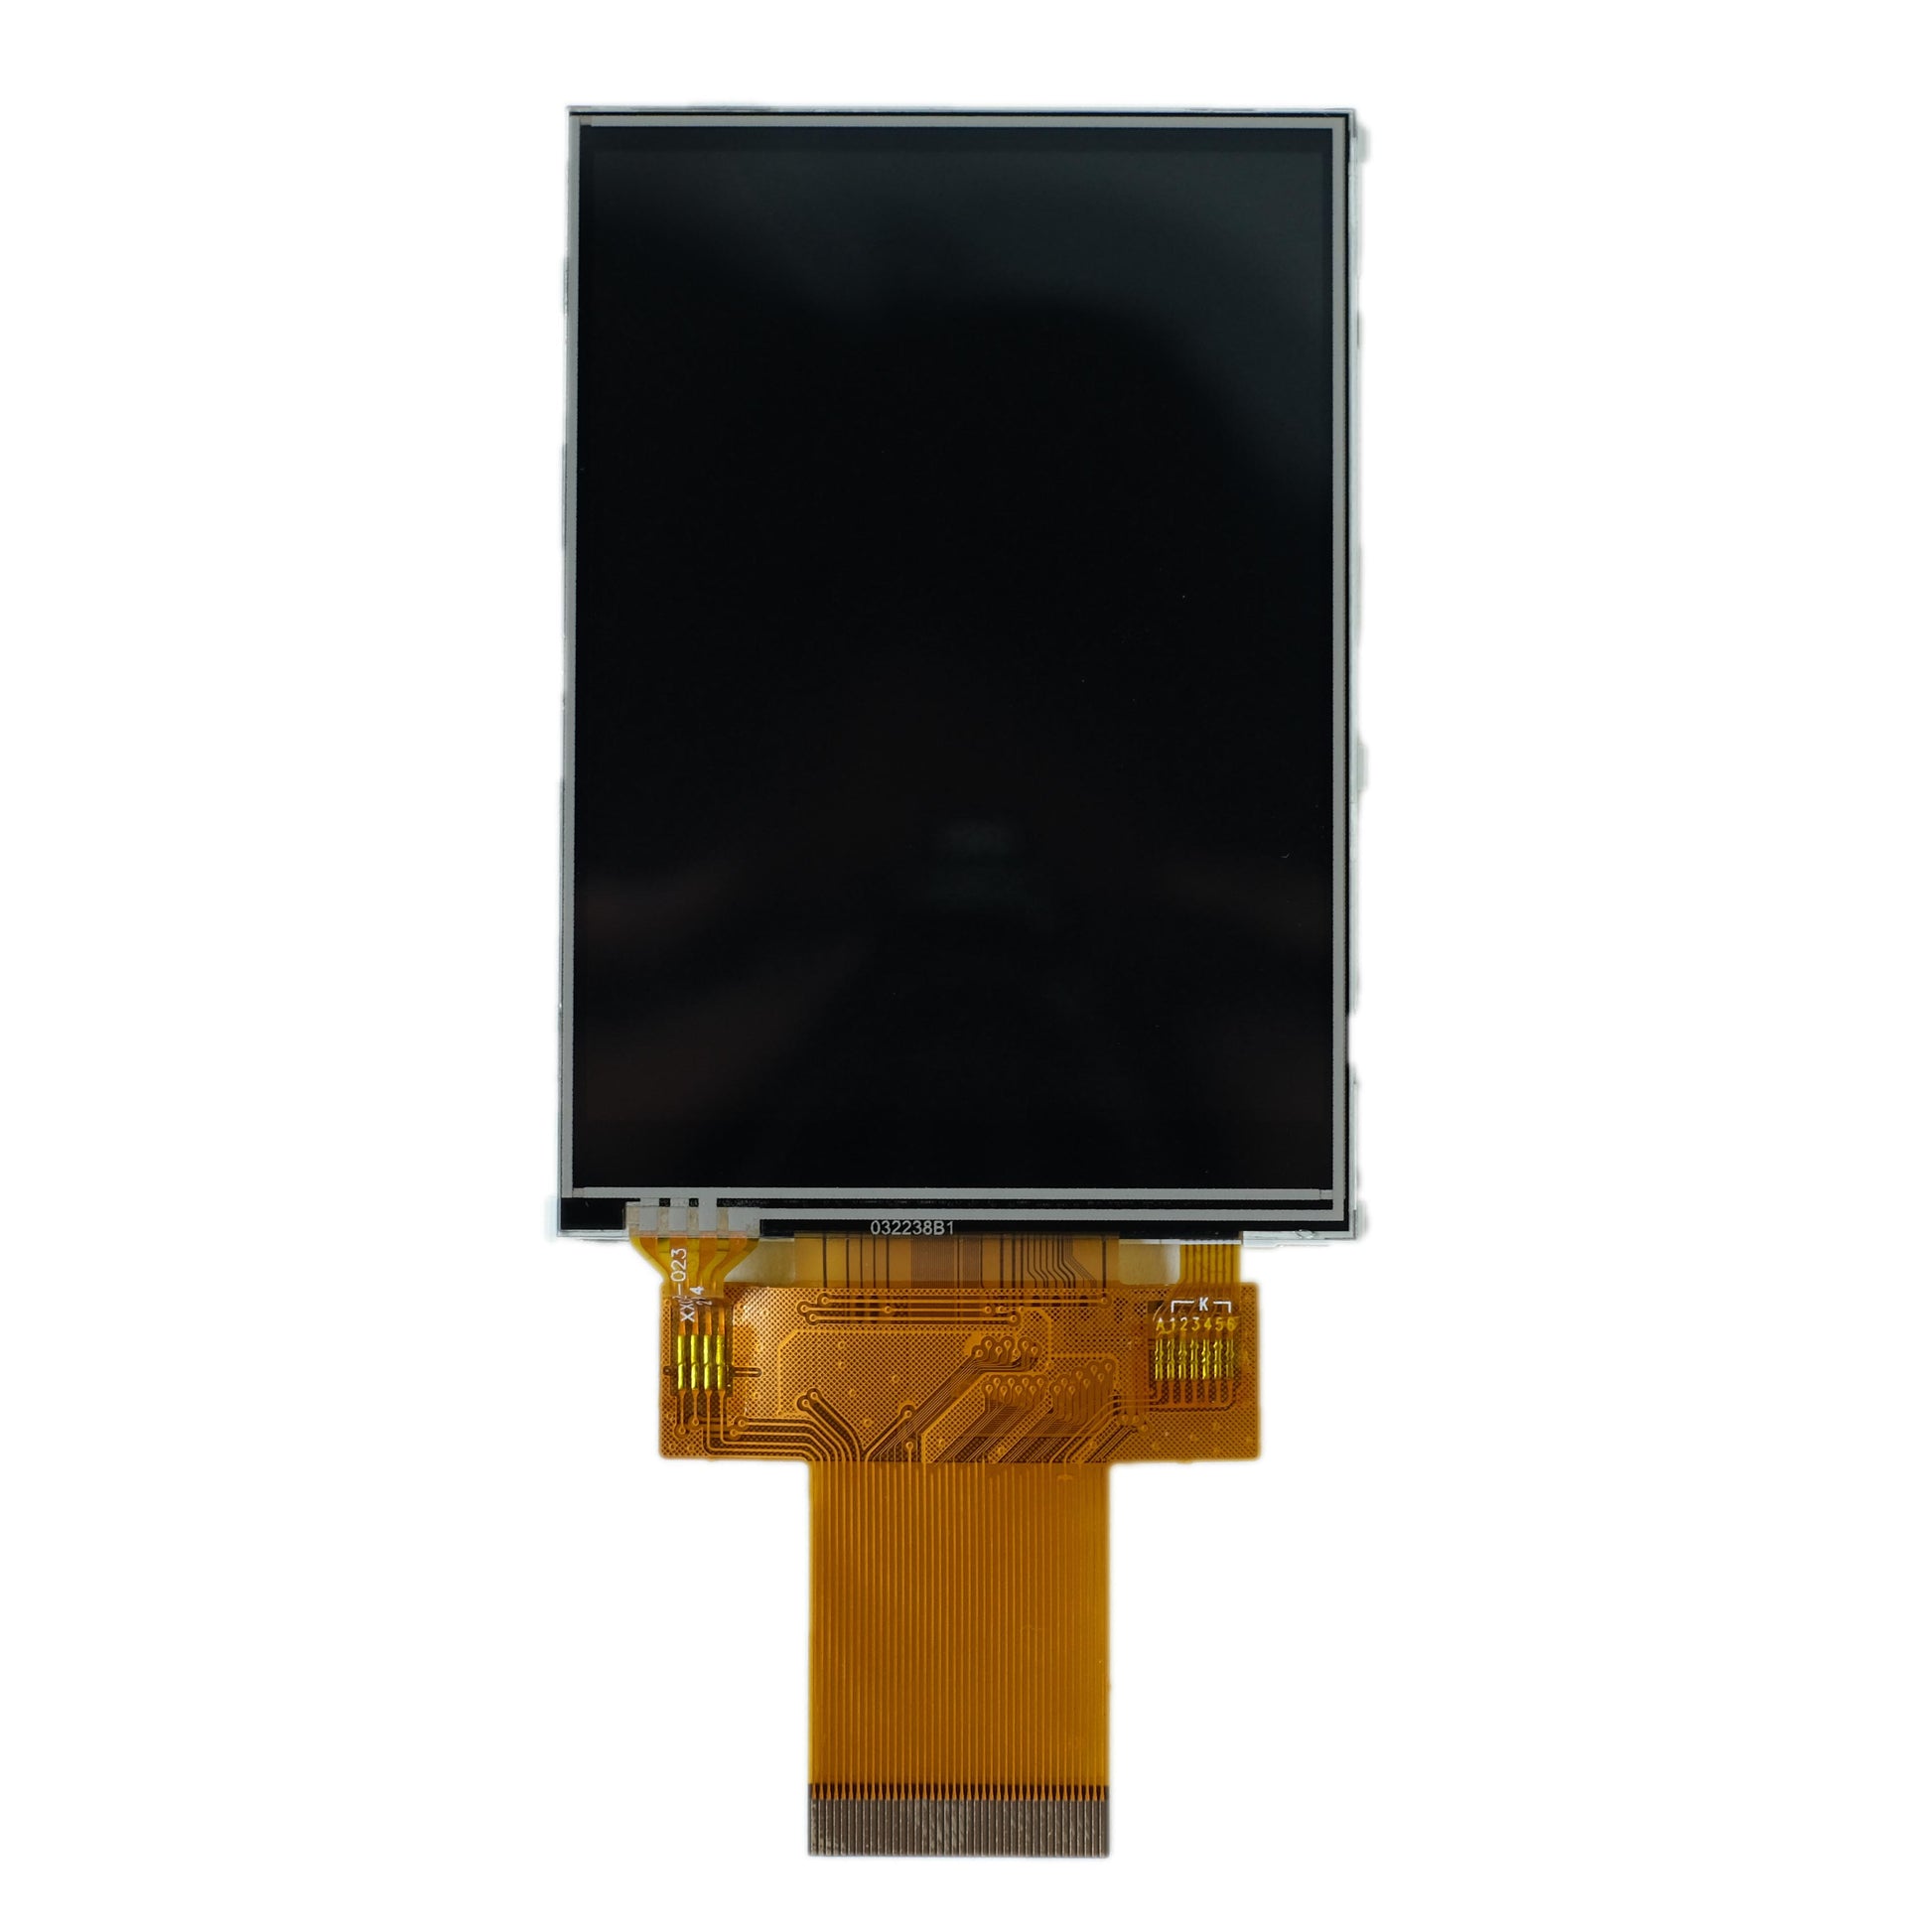  3.2-inch 240x320 TFT display panel with SPI interface